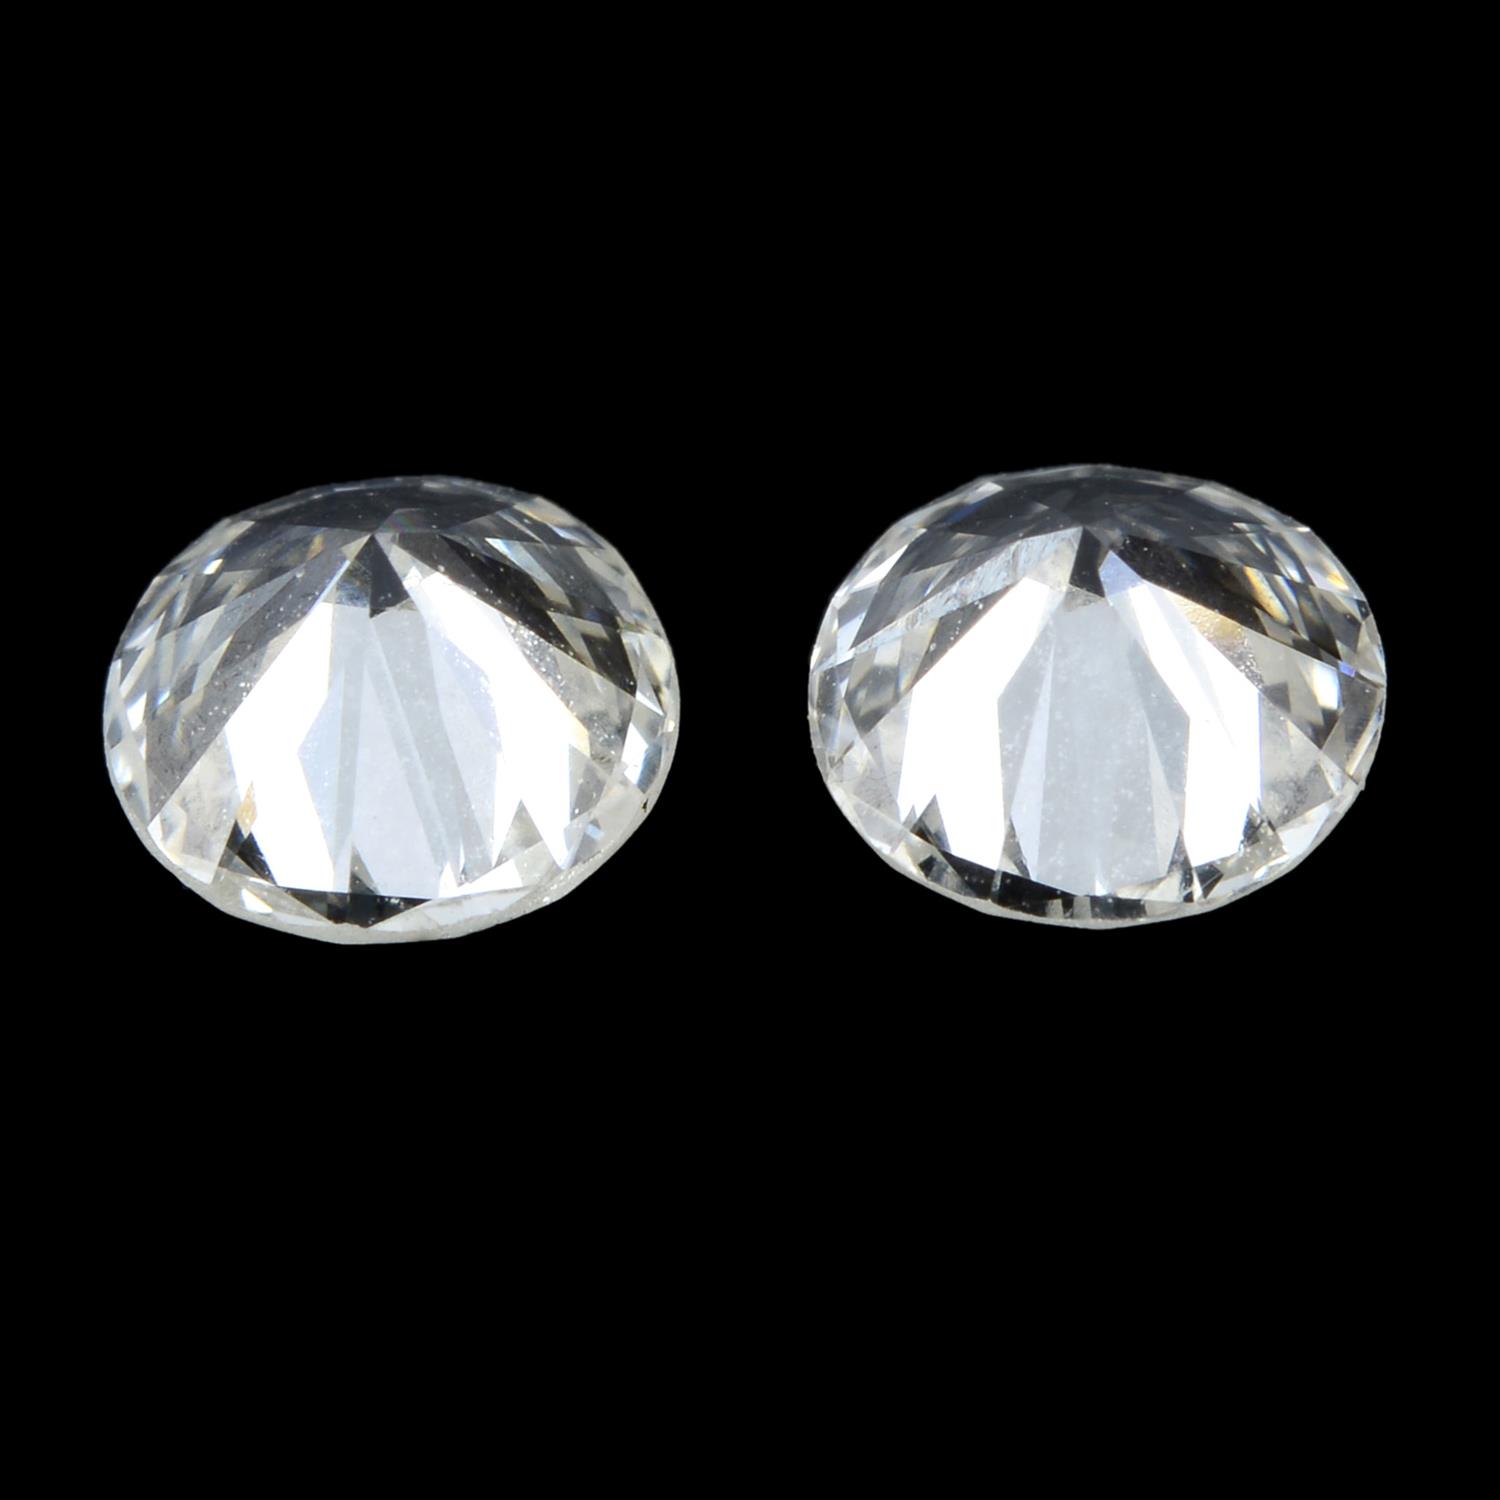 Pair of brilliant cut diamonds weighing 0.55ct - Image 2 of 2